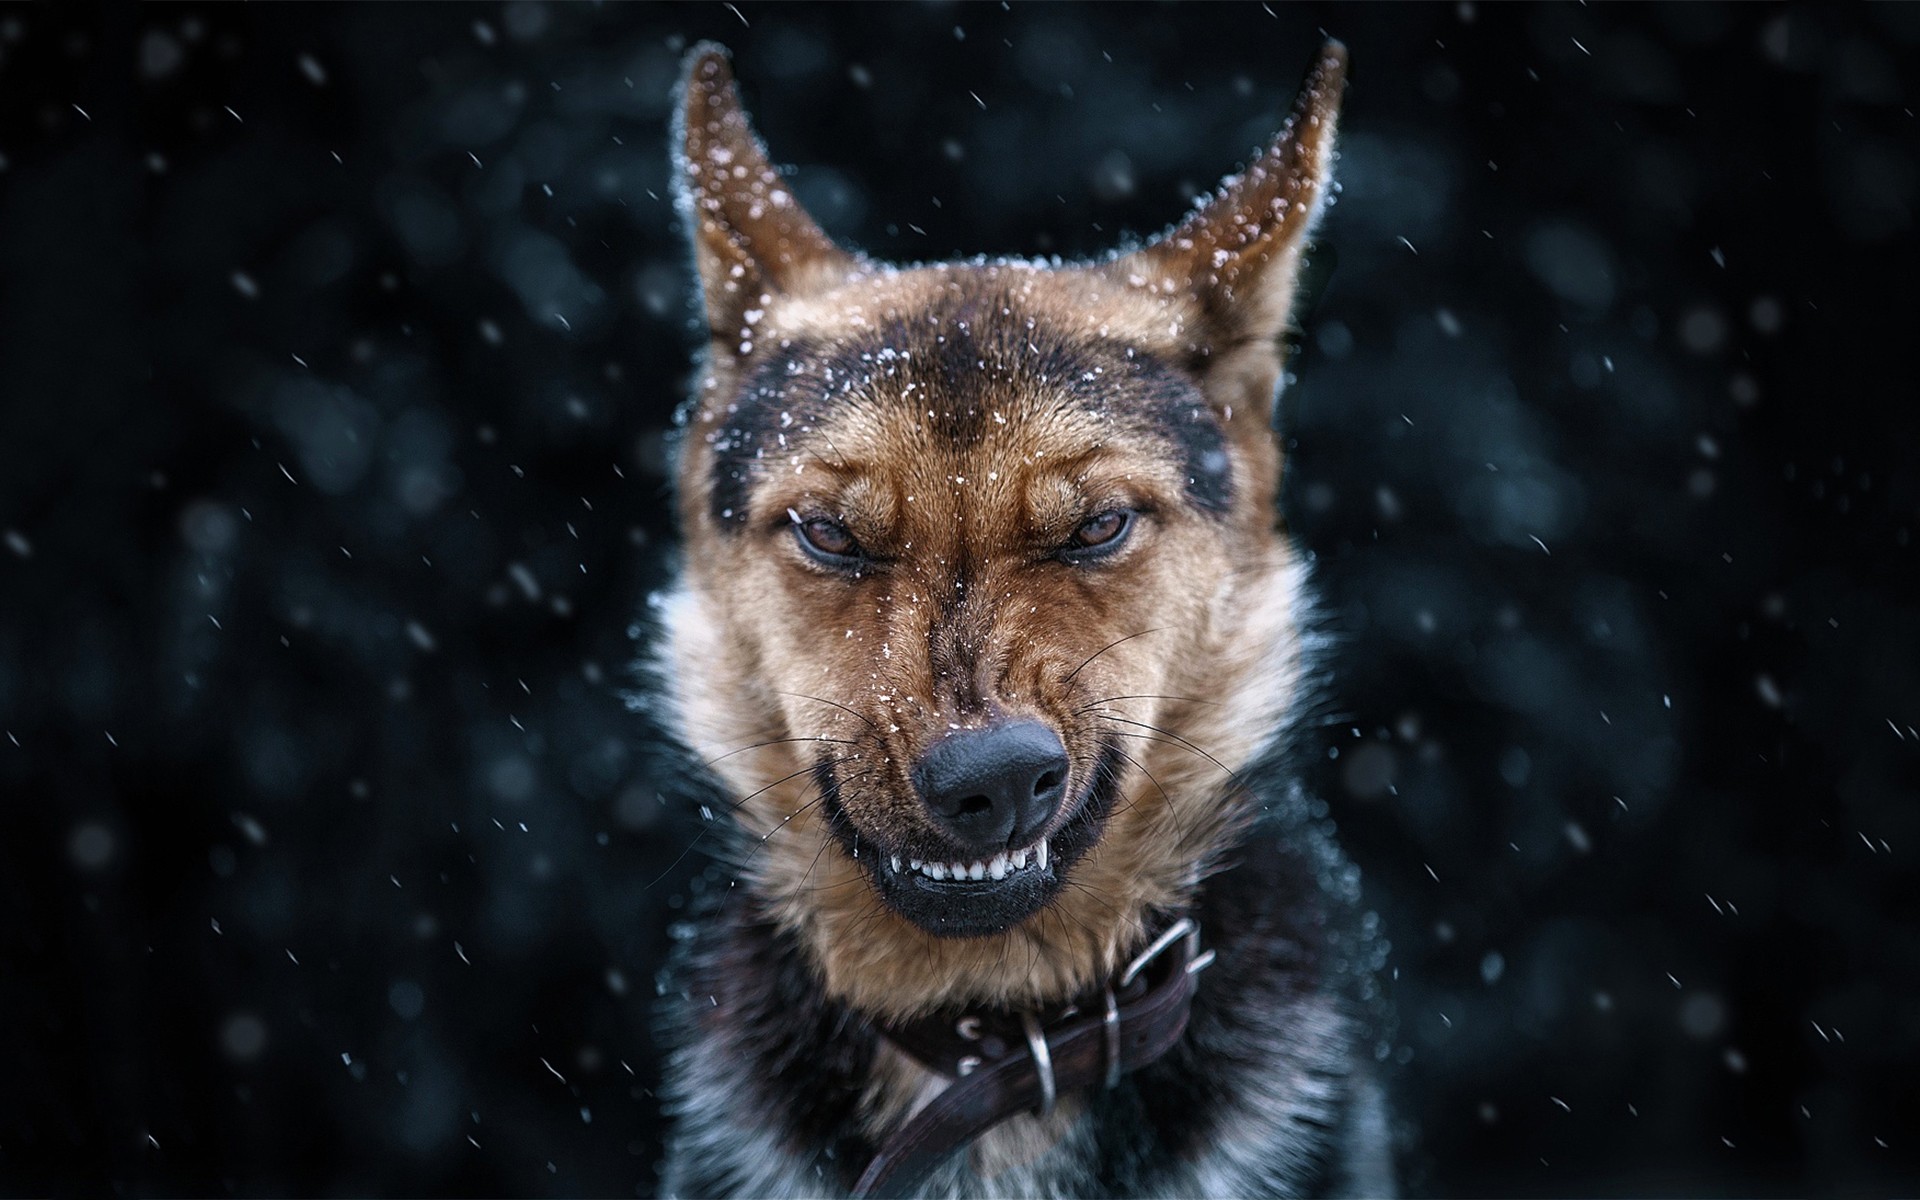 A moment of the dog`s face catching the snow